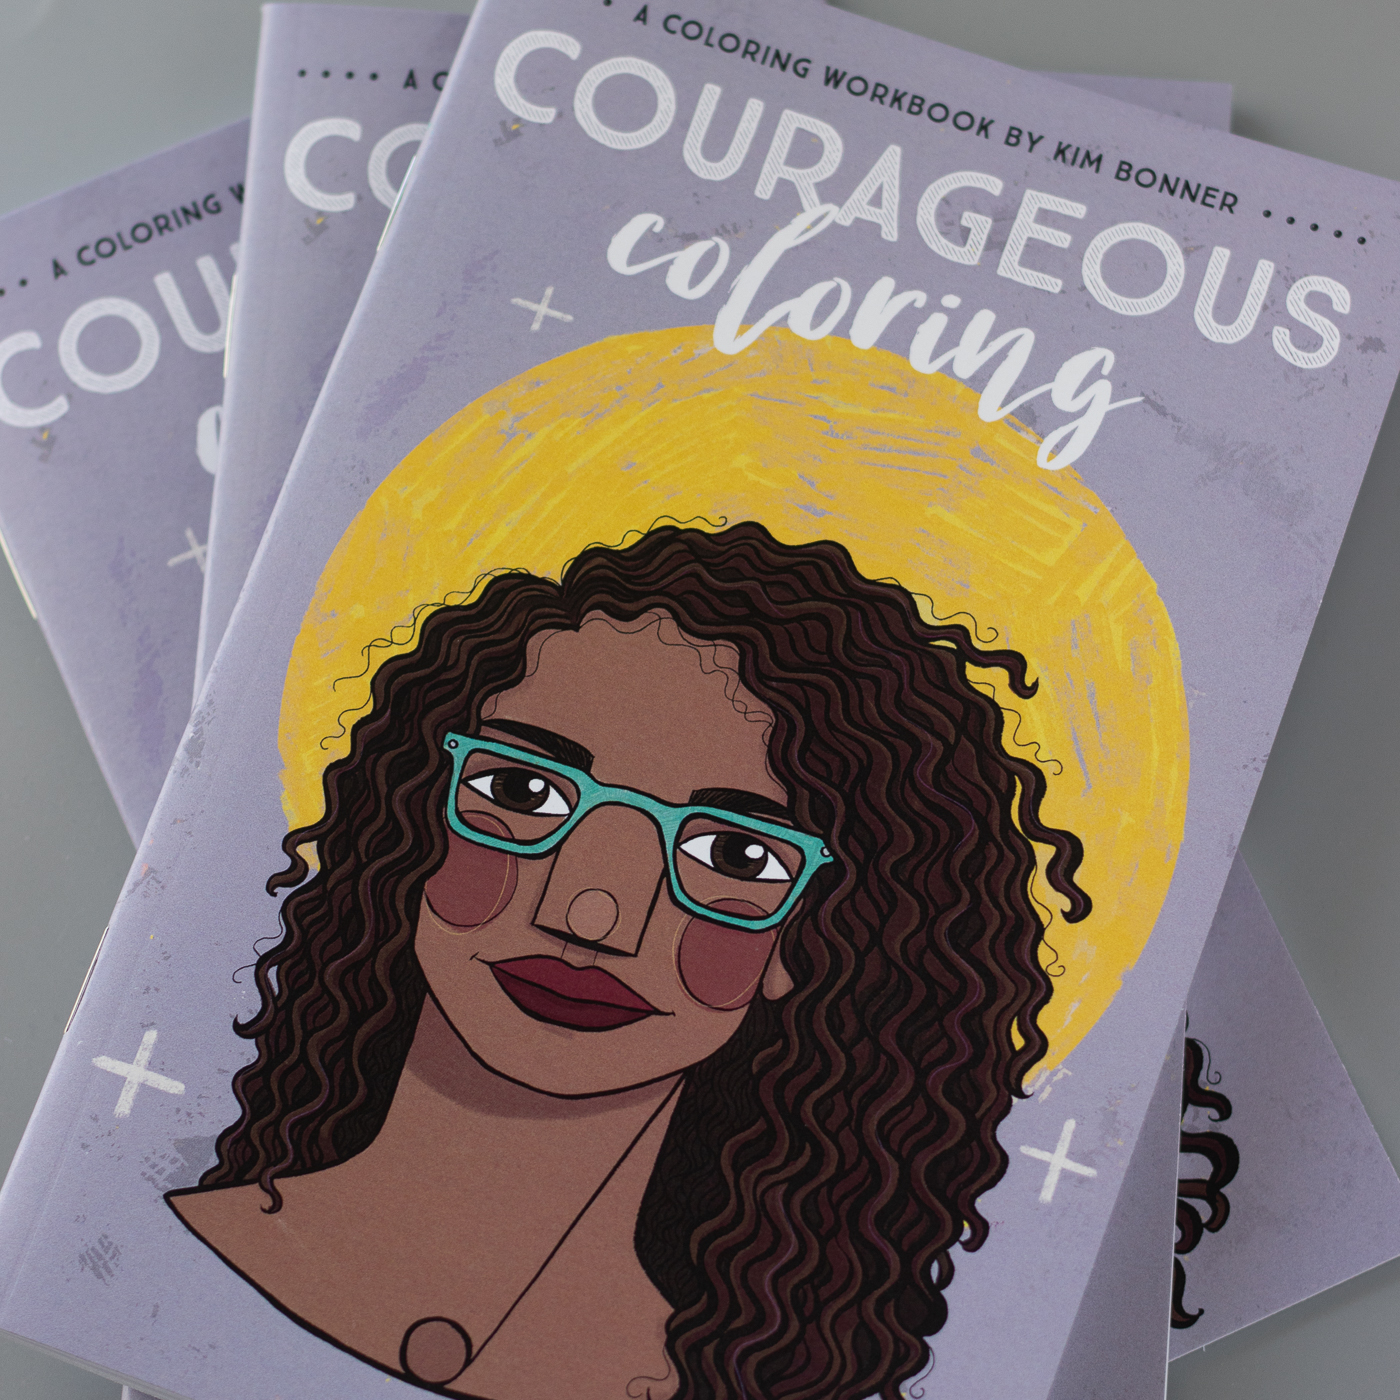 The cover of the Courageous Coloring Workbook, Volume 2